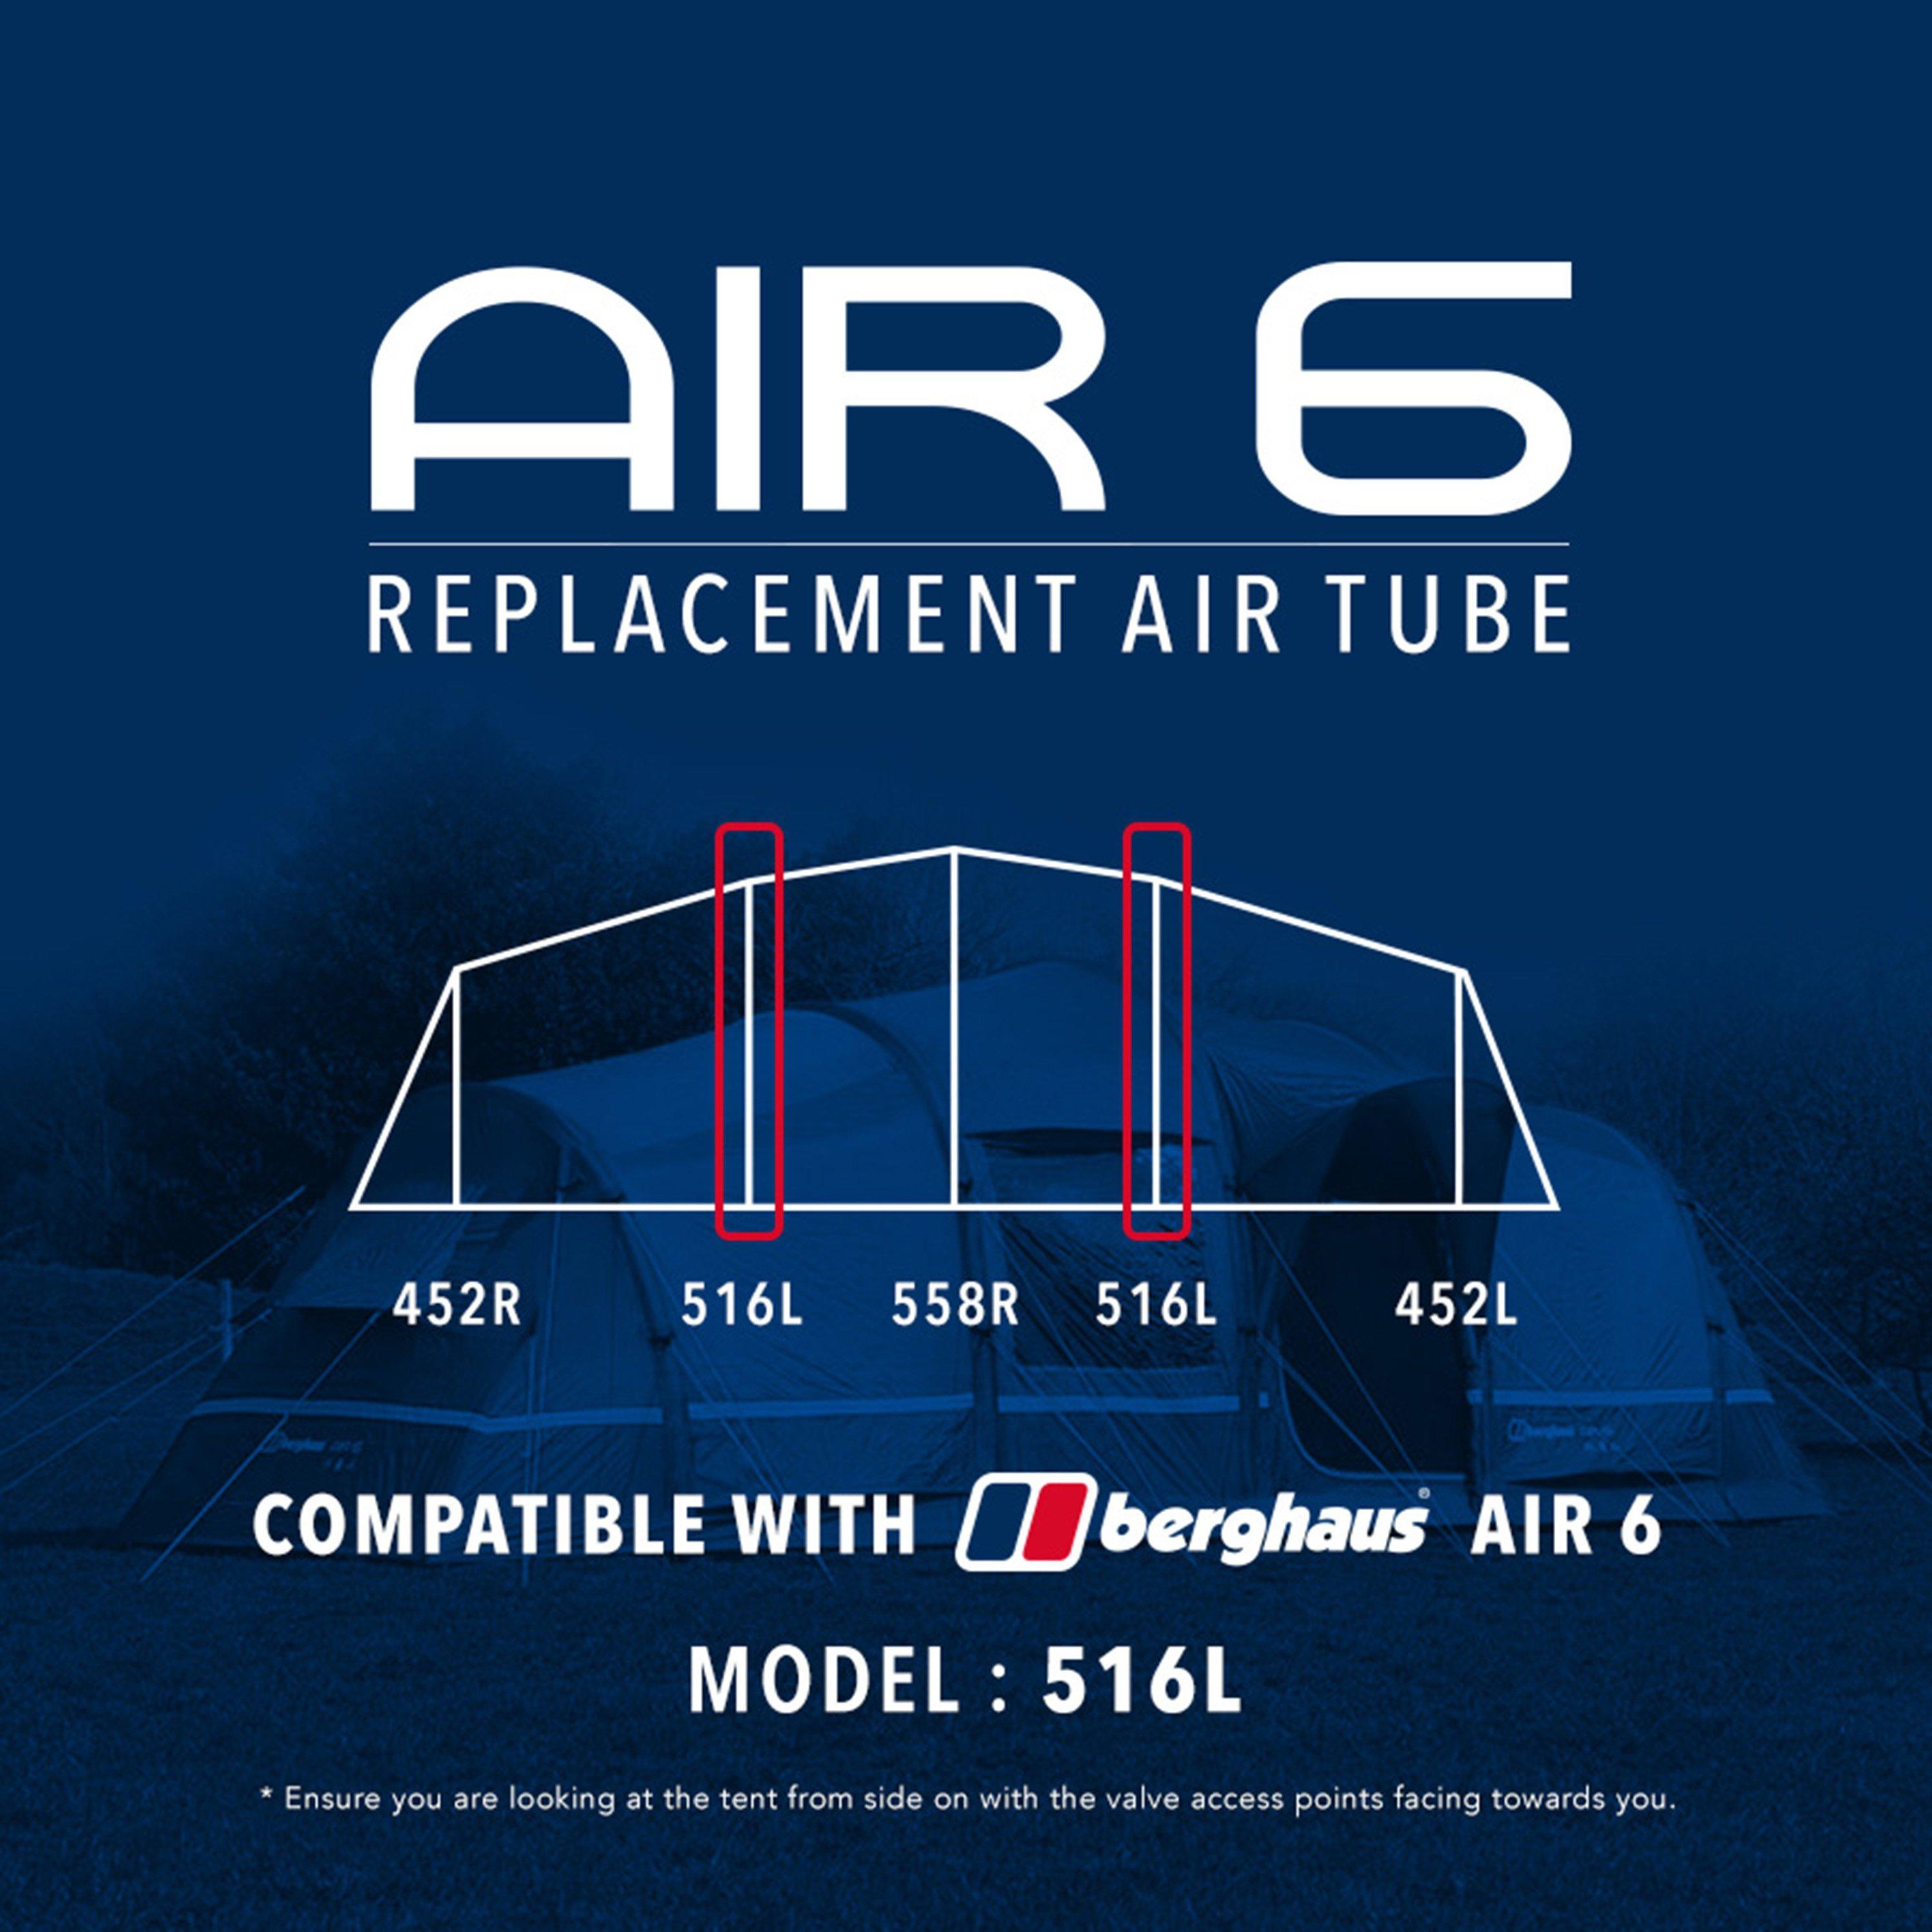  Eurohike Air 6 Tent Replacement Air Tube - 516L, Blue